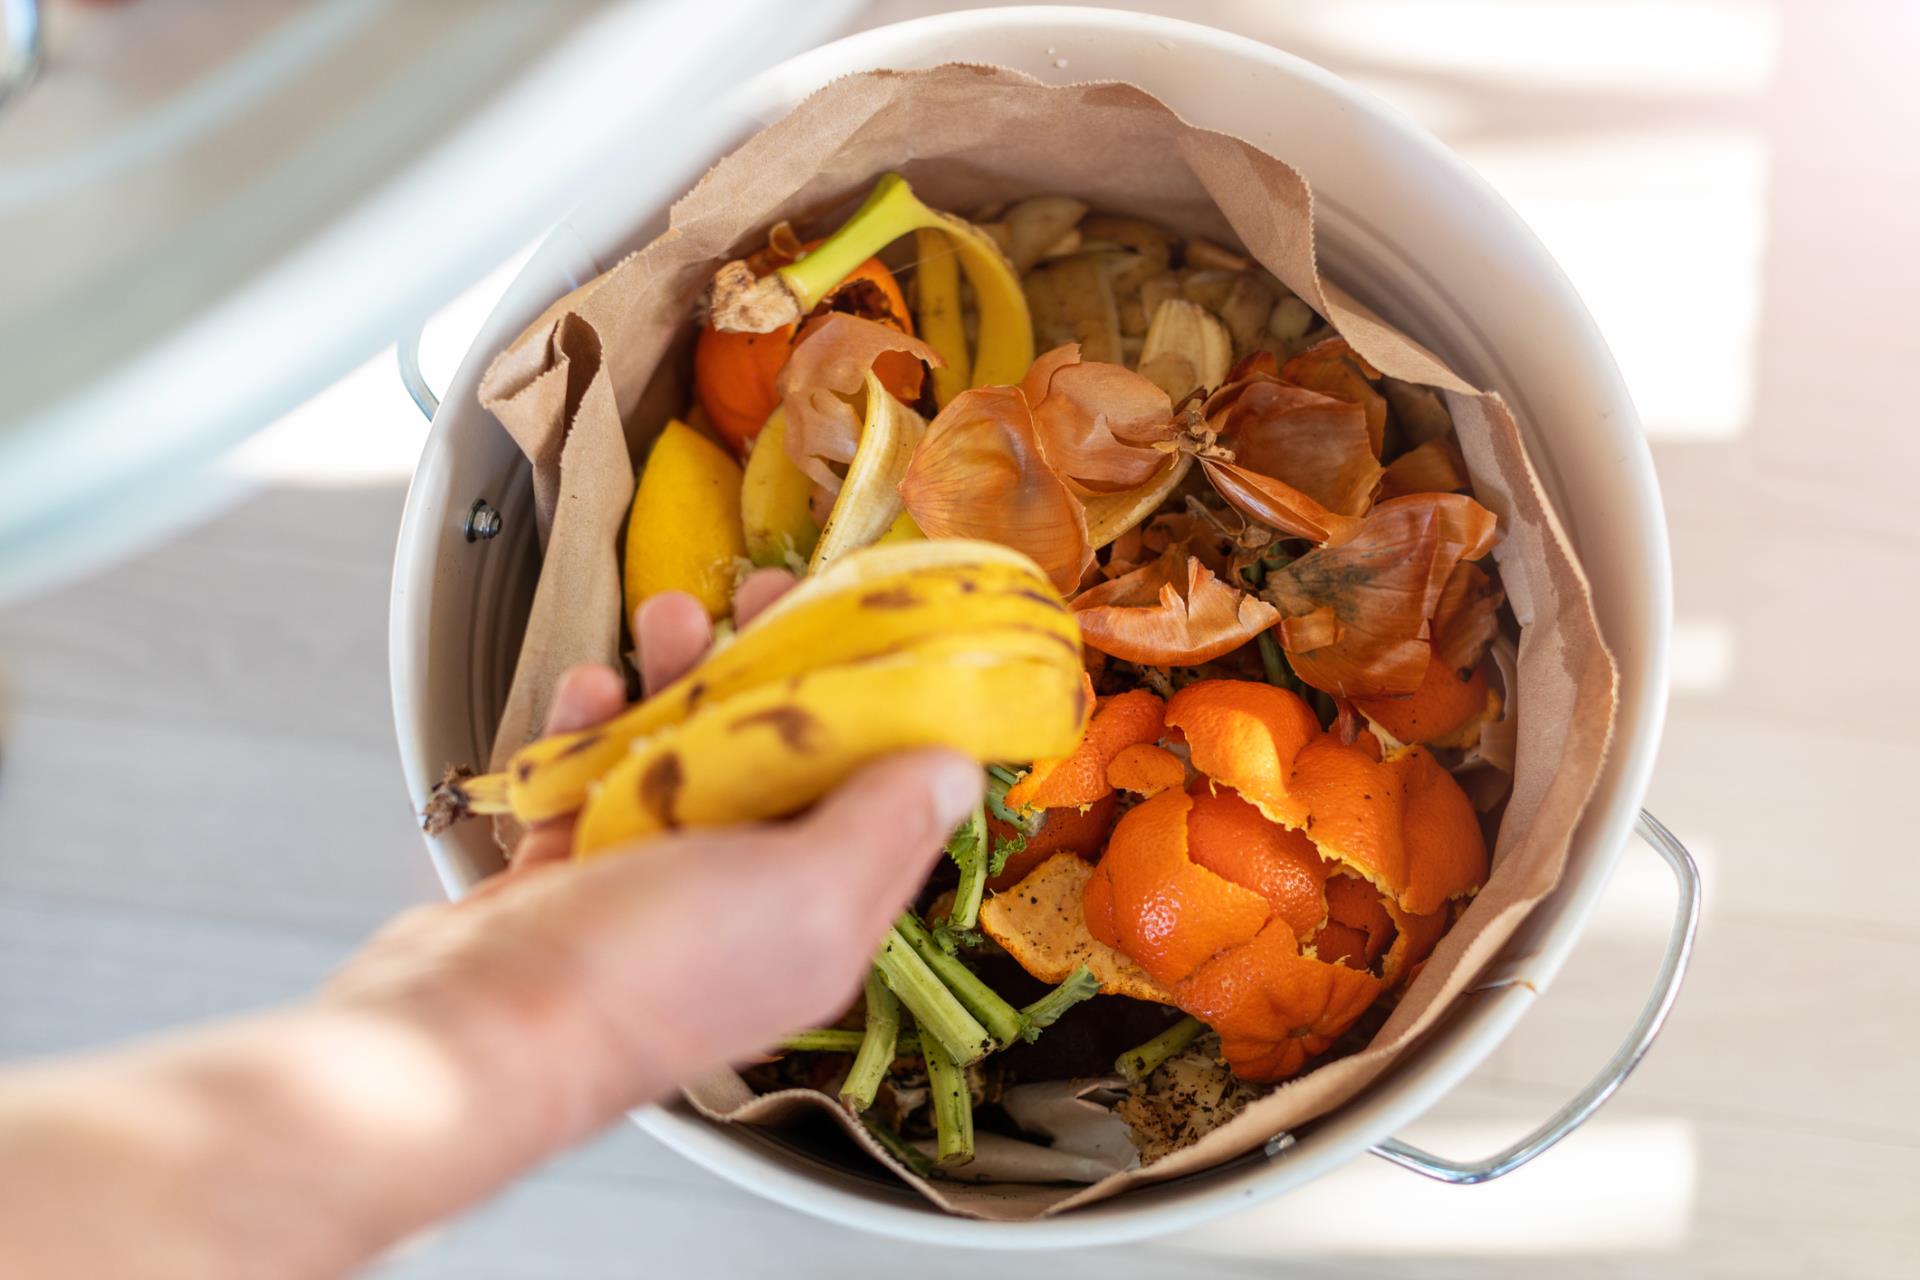 Getty Images of a bin with a paper bag filled with food waste and a hand throwing in a banana peel